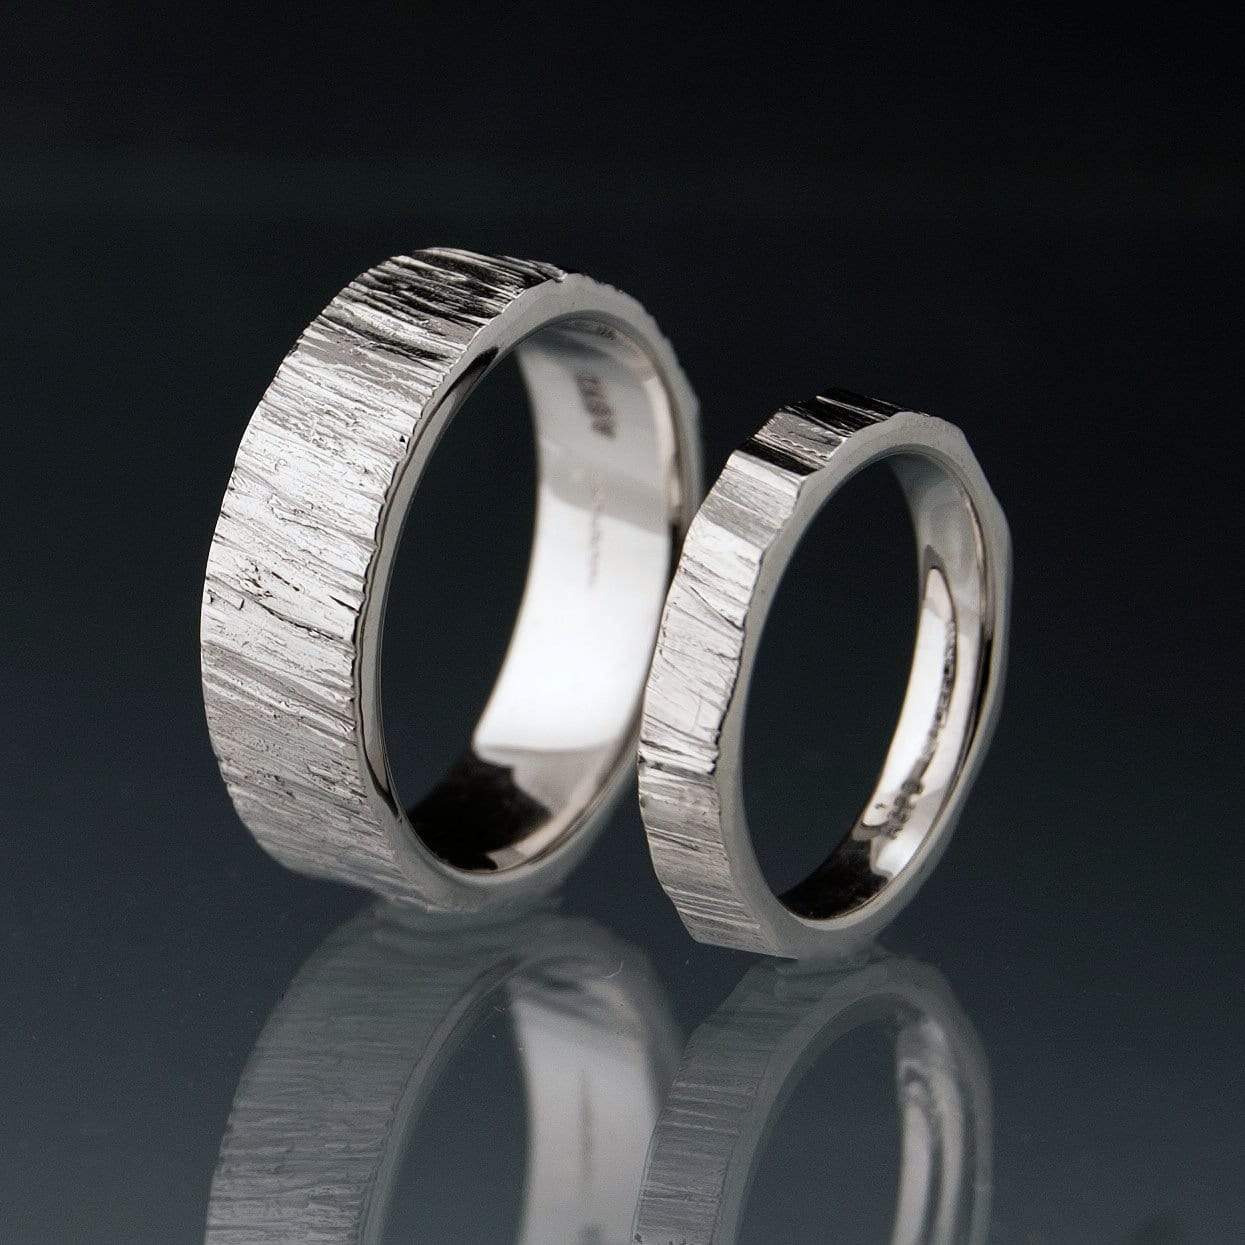 Saw Cut Texture Wedding Bands, Set of 2 Rings, His and Hers Sterling Silver Ring Set by Nodeform